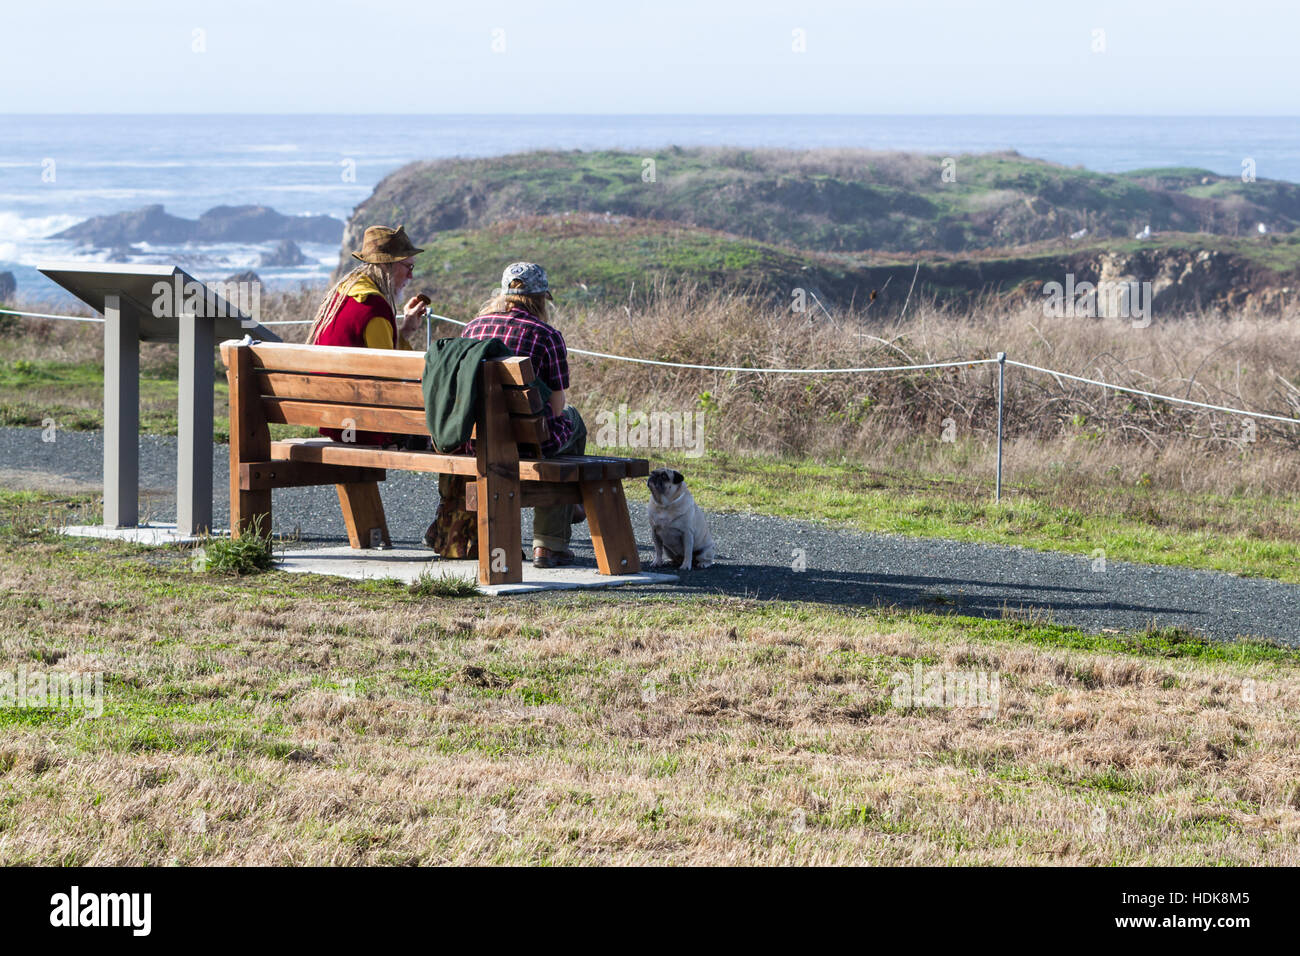 California - November 03: Couple having a snack with a coastal view in the background and a small puppy begging for food. November 03 2016, California Stock Photo